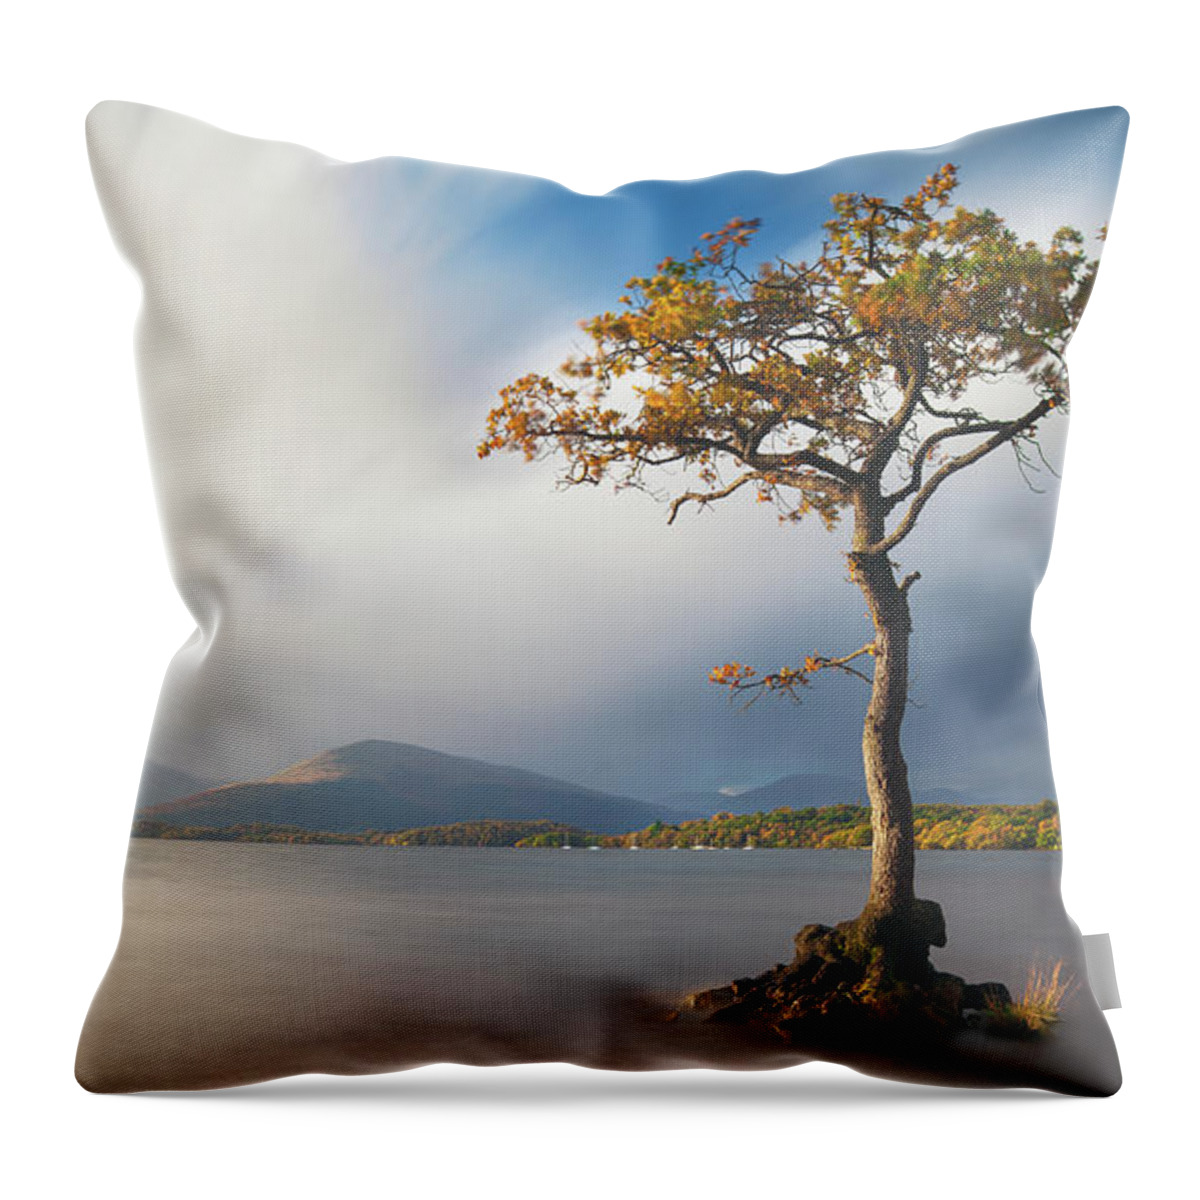 Scenics Throw Pillow featuring the photograph Autumn At Loch Lomond by Kenny Mccartney